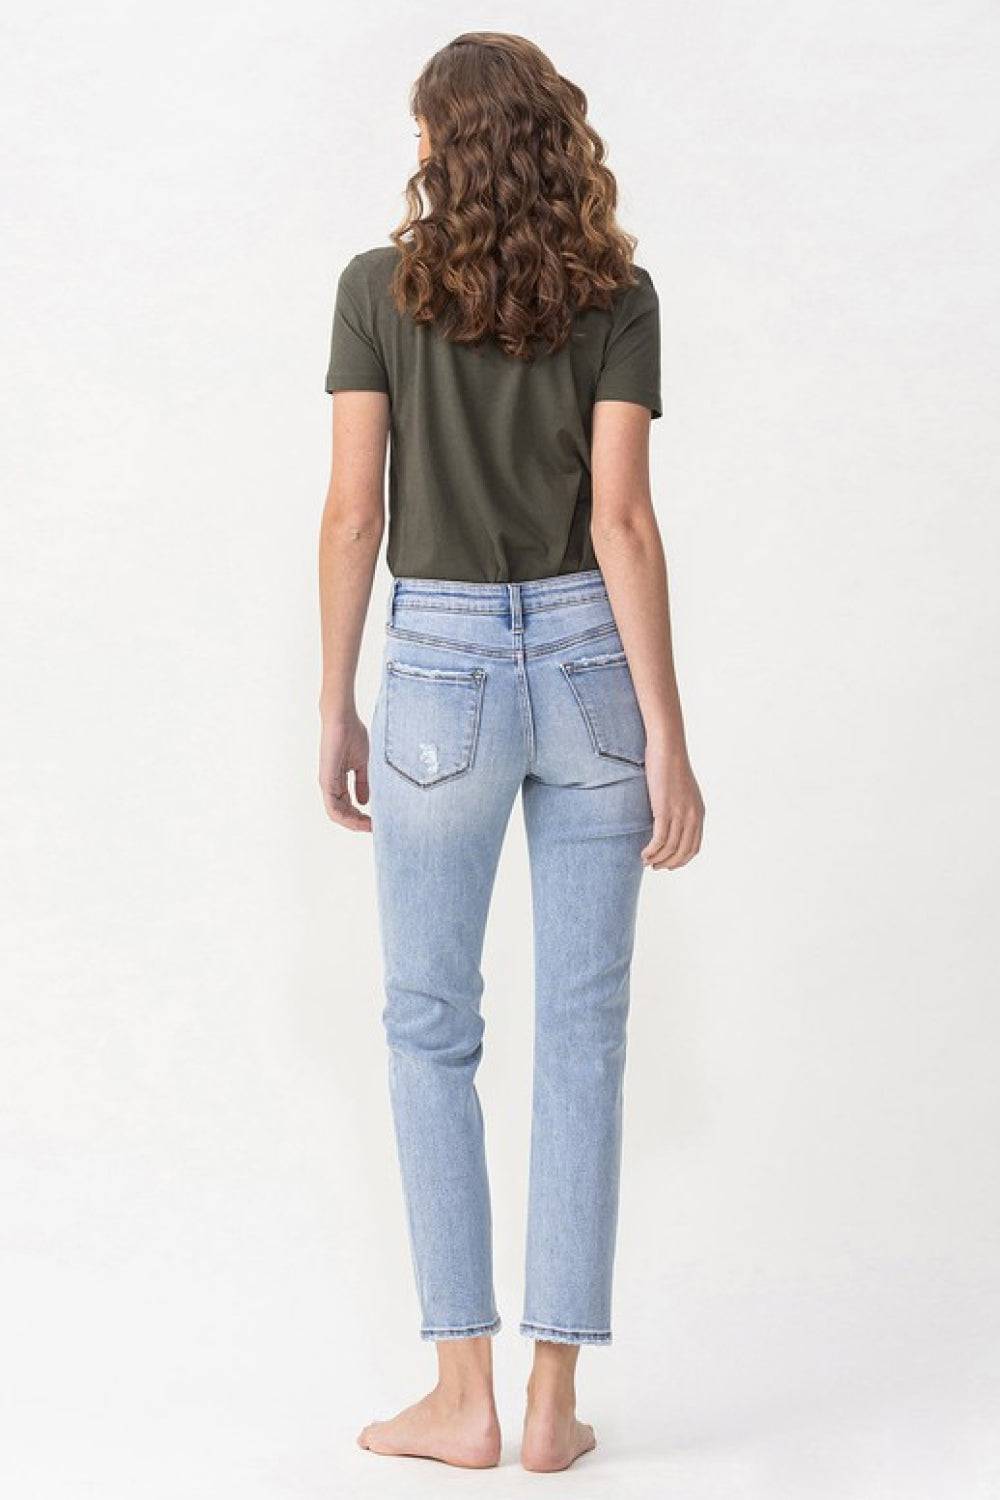 Enchant Your Heart - Indulge in the Beauty of LOVERVET's Full Size Andrea Midrise Crop Straight Jeans and Let Your Unique Charm Shine Through. - Guy Christopher